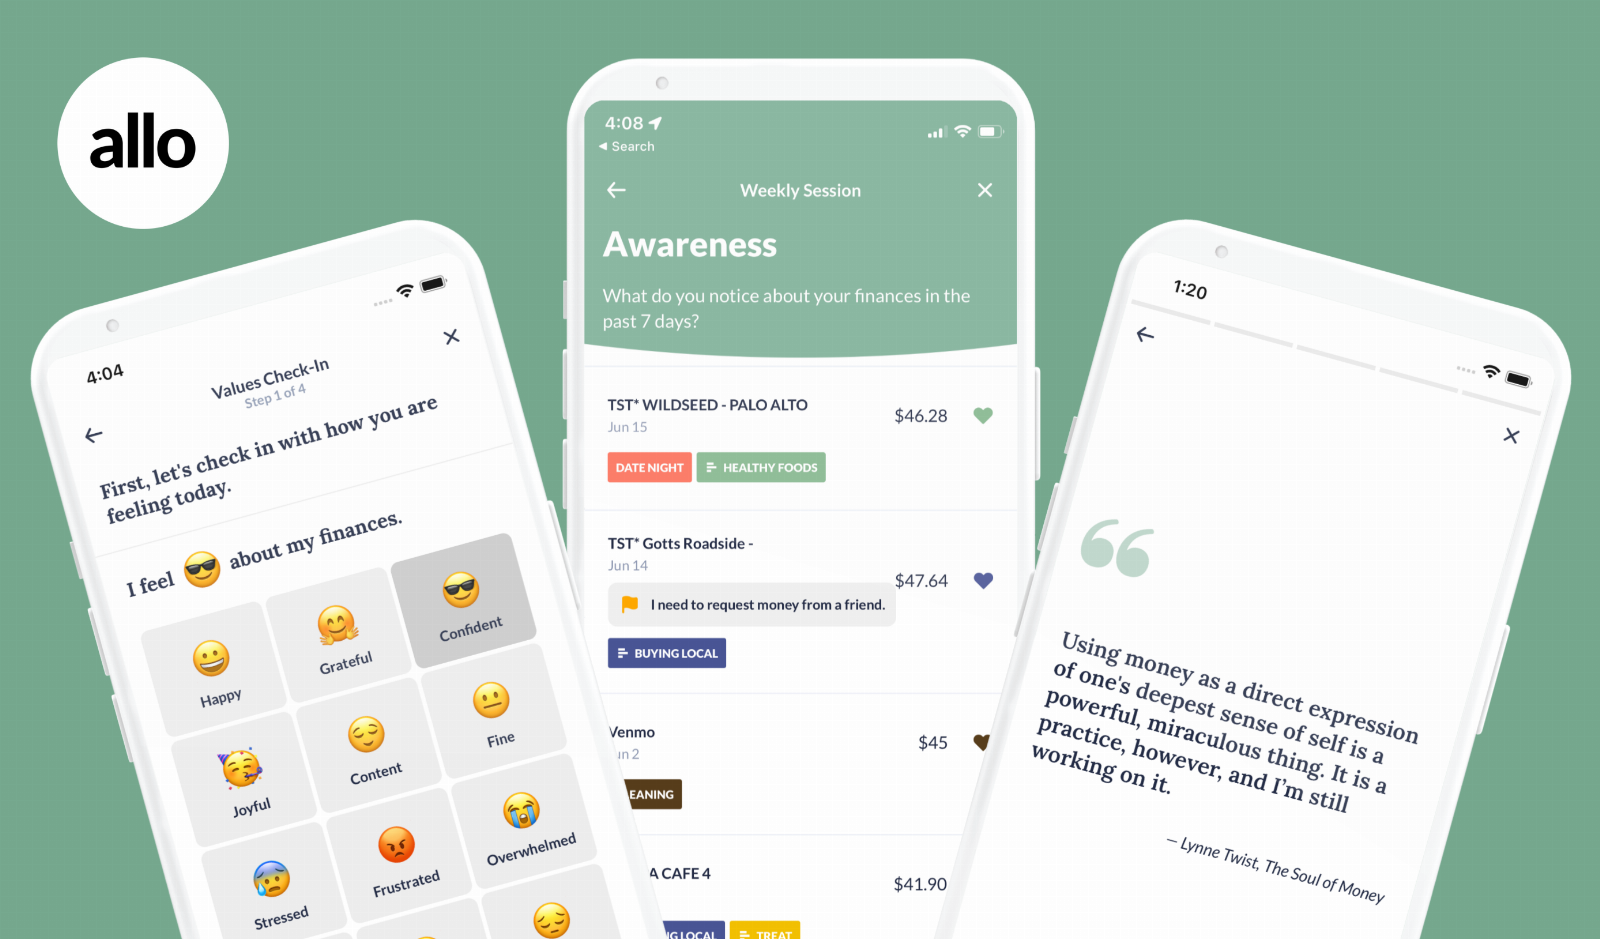 Allo is a new app that aims to help people create positive habits with their finances through mindfulness